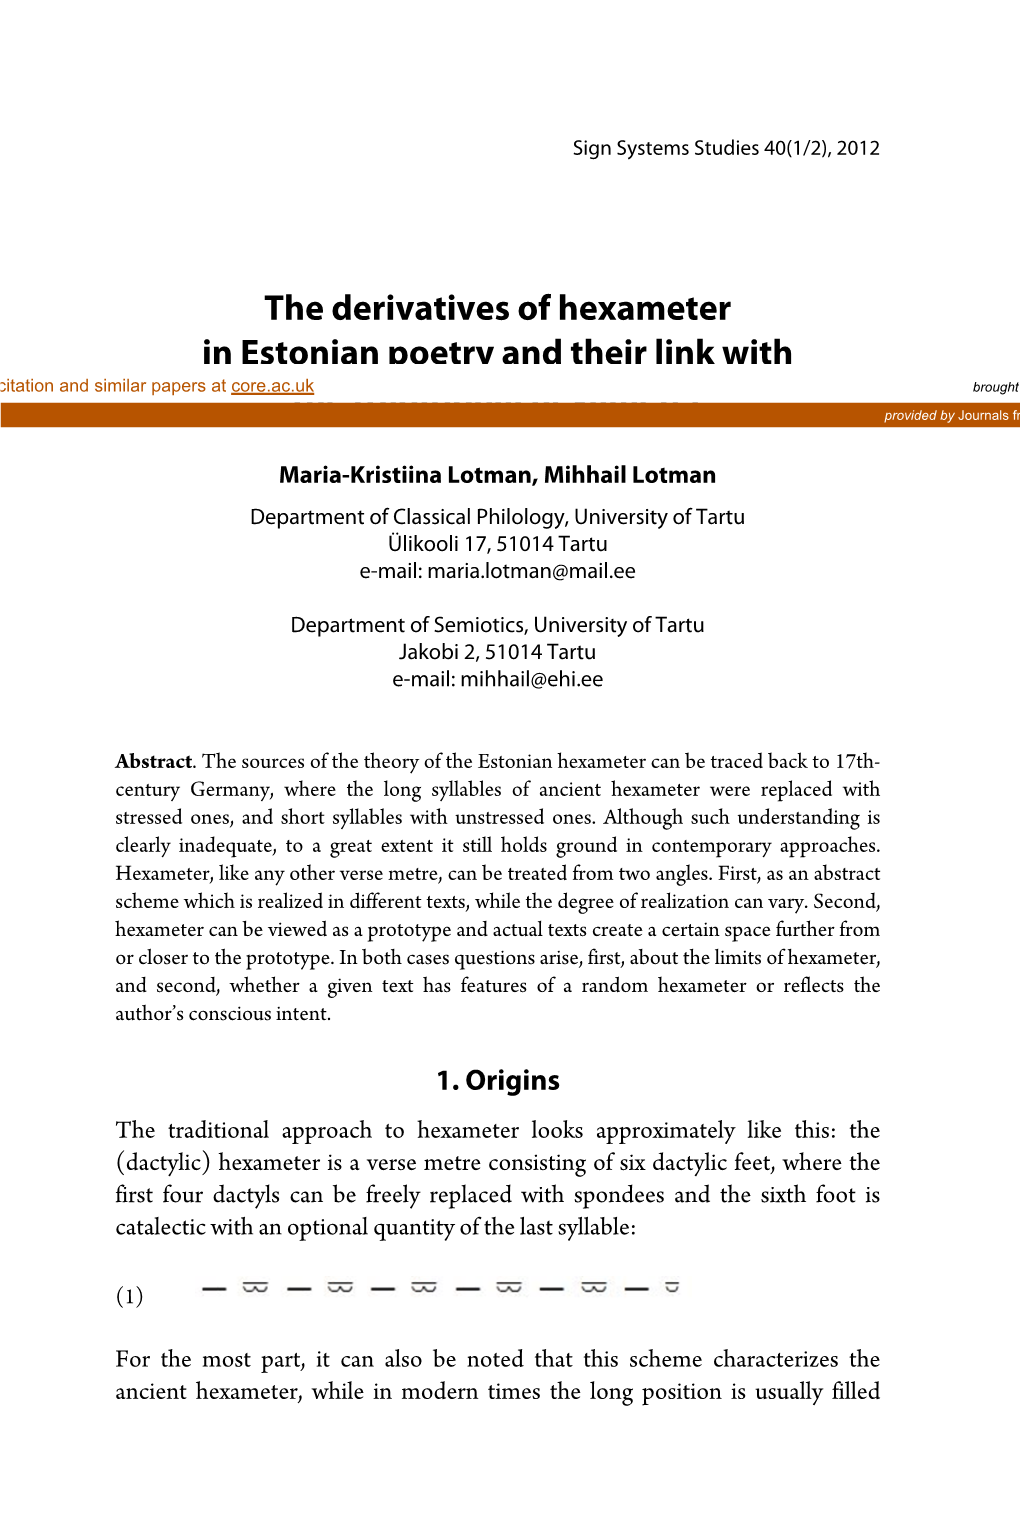 The Derivatives of Hexameter in Estonian Poetry and Their Link with View Metadata, Citation and Similar Papers at Core.Ac.Uk Brought to You by CORE